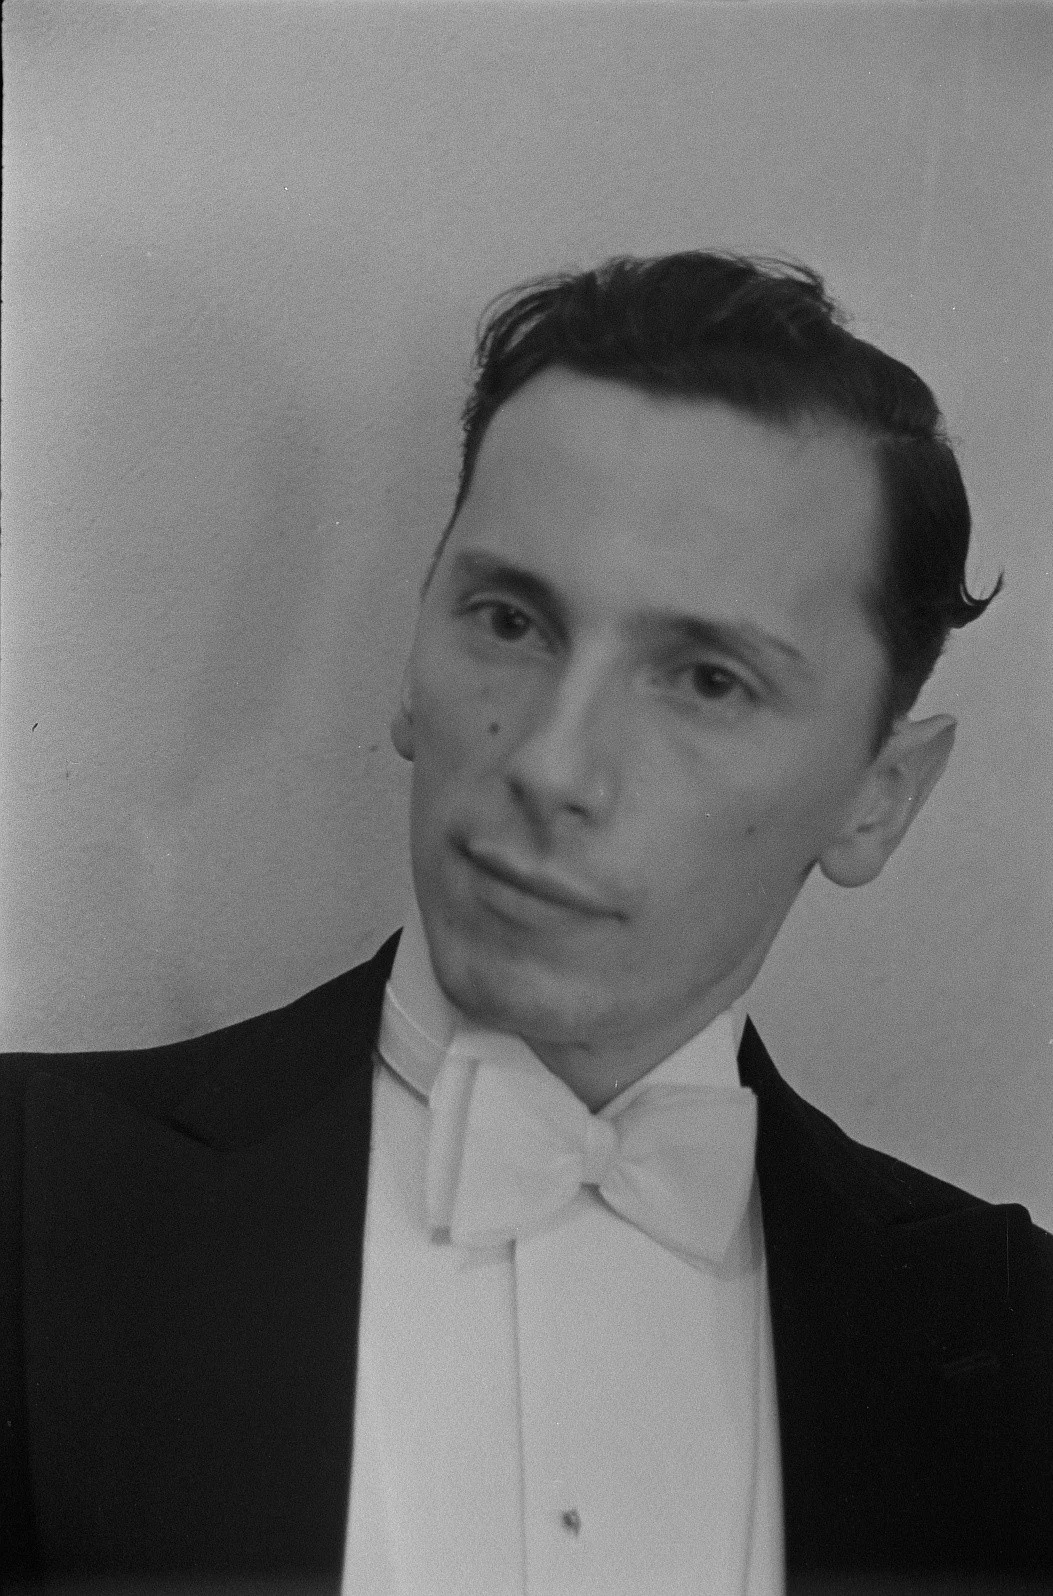 black and white photograph portrait of Andrzej Panufnik, a young man wearing a suit and a bow-tie